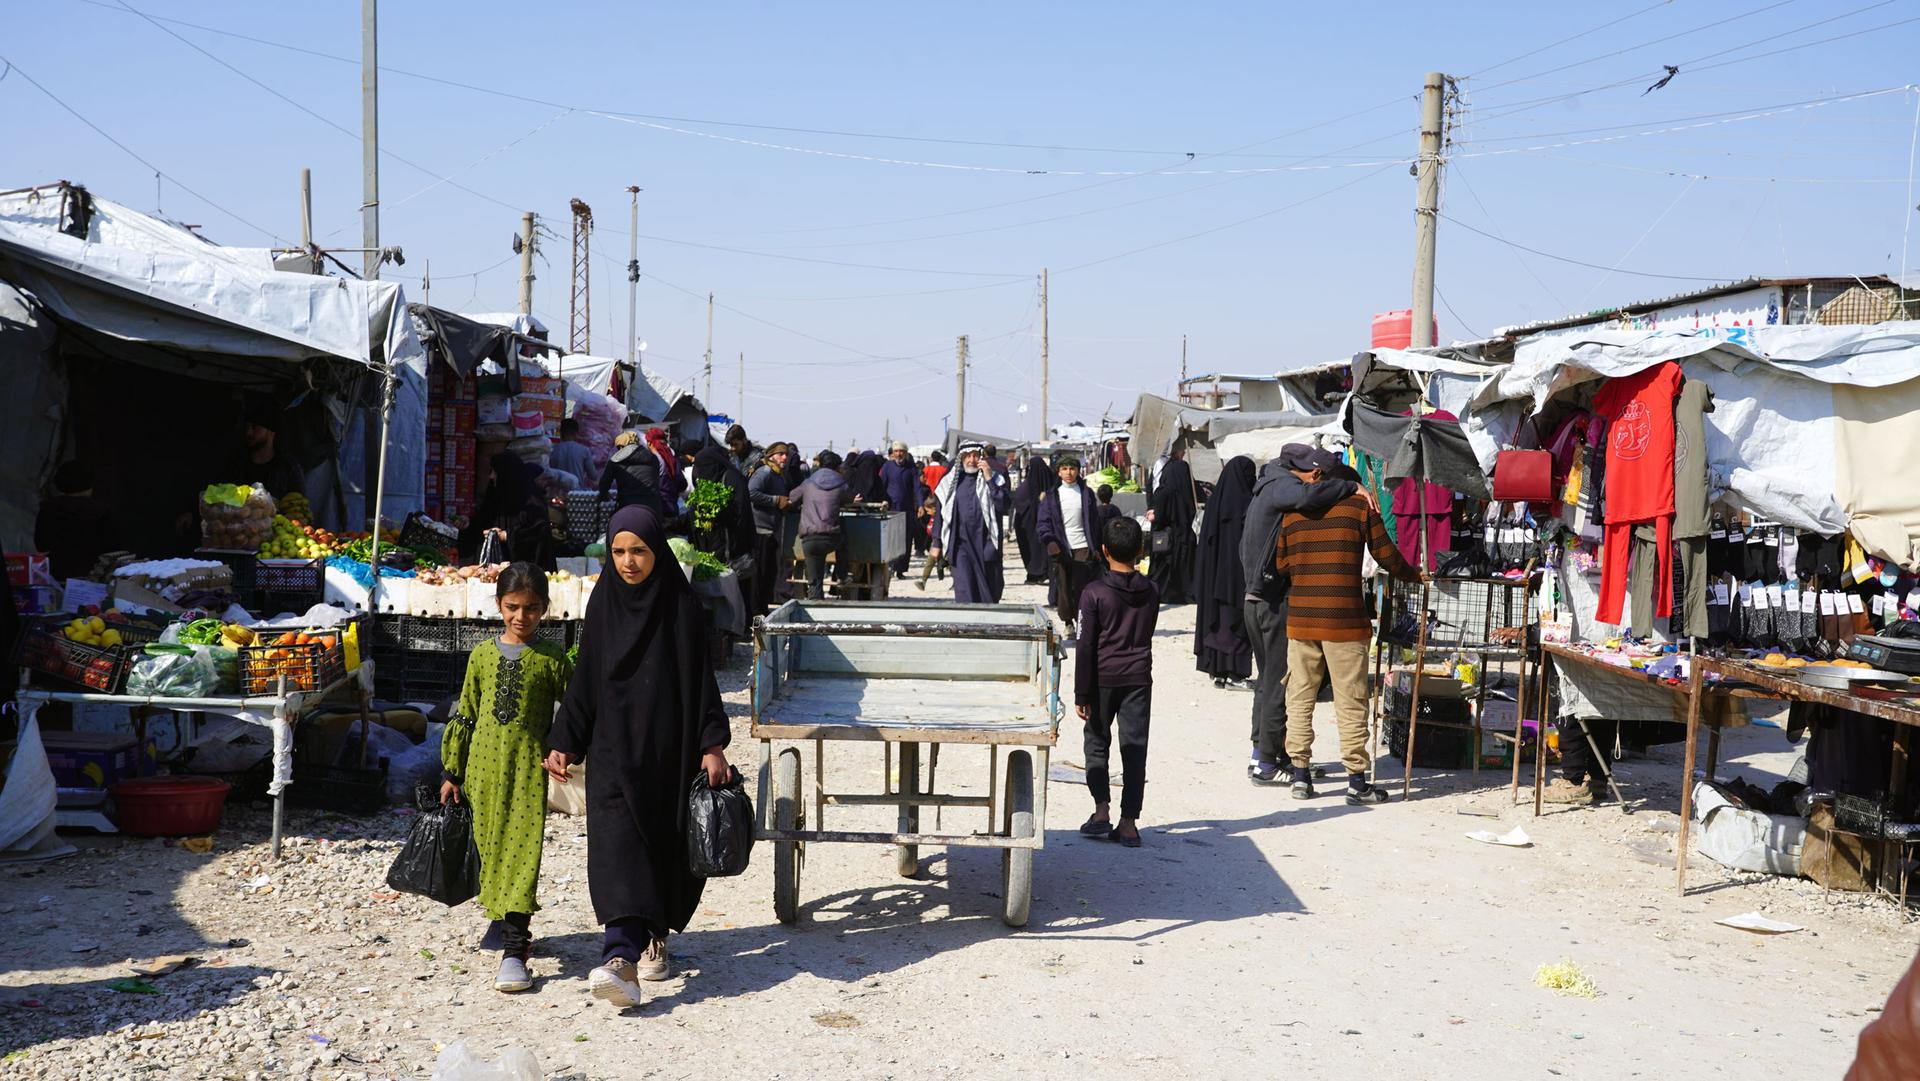 A scene at the market in al-Hol camp, northern Syria.